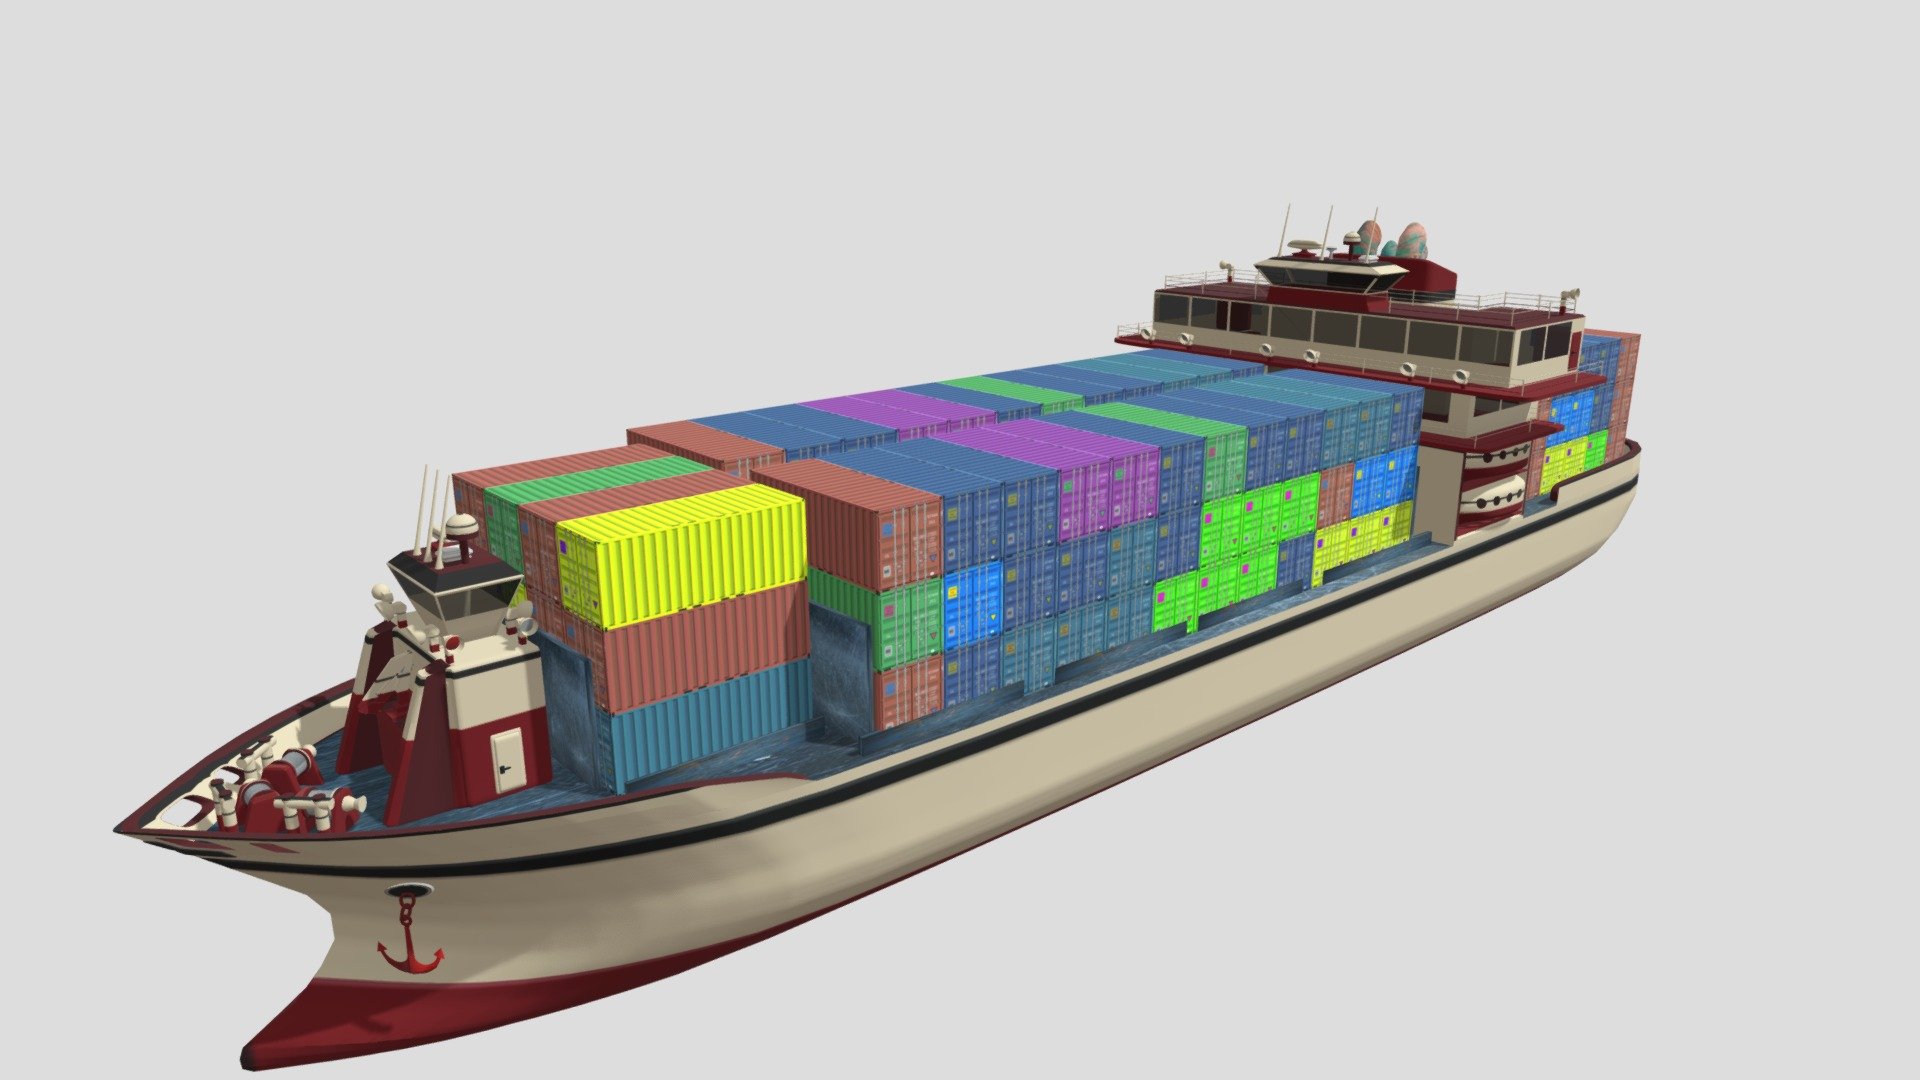 Cargo Ship 02 Download Free 3d Model By Gogiart Agt14032013 22135f8 Sketchfab 